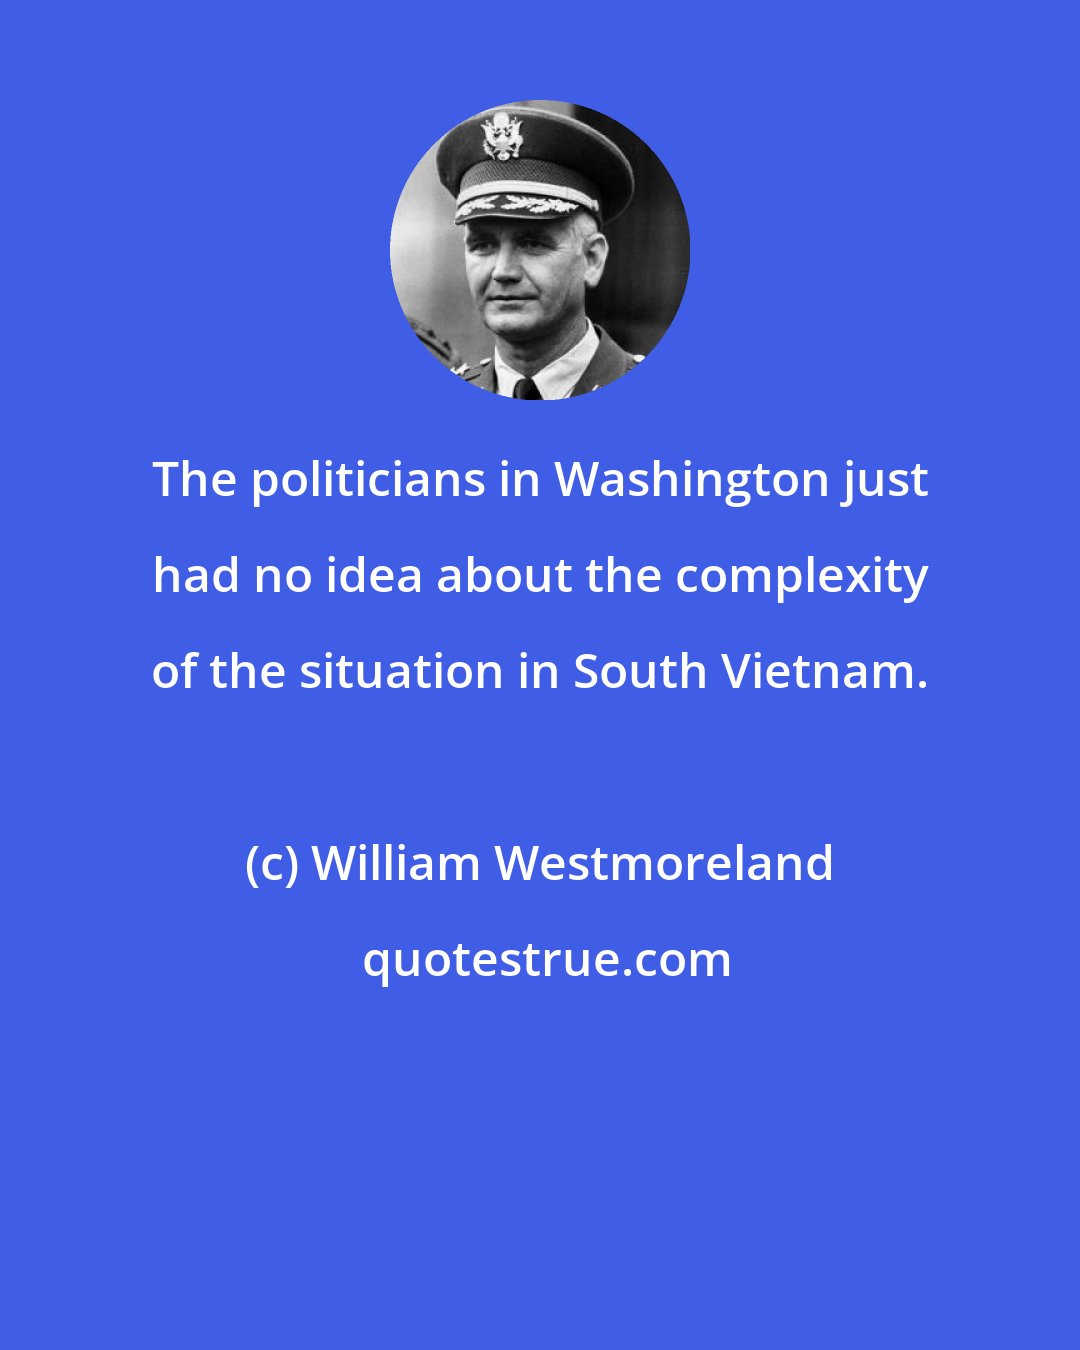 William Westmoreland: The politicians in Washington just had no idea about the complexity of the situation in South Vietnam.